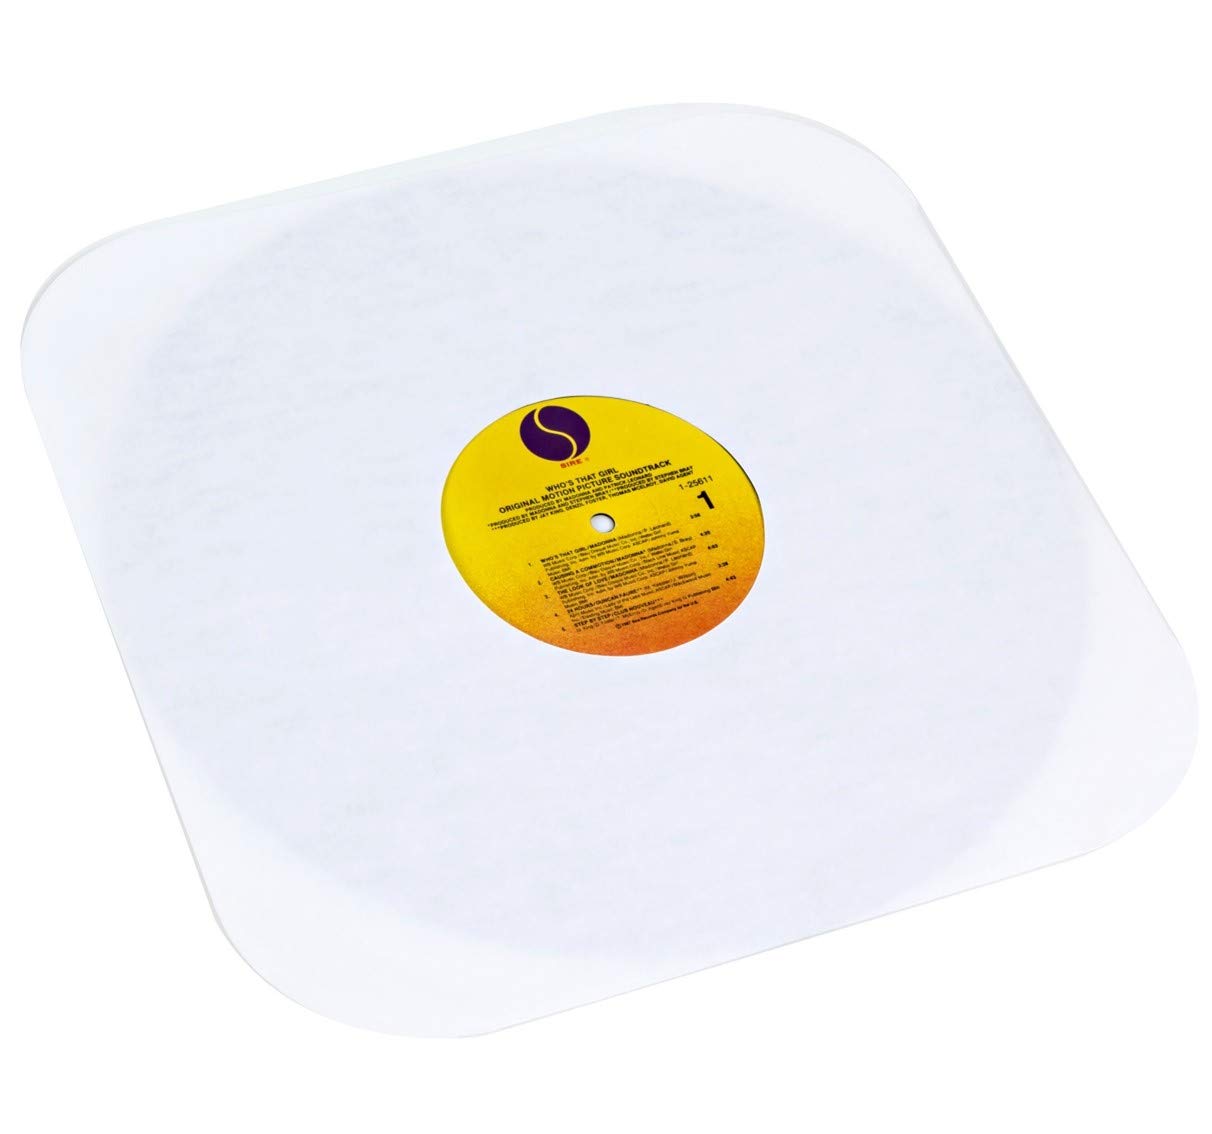 Vinyl Record Inner Paper Sleeves - Premium Acid Free Protection Covers for 12 inch LP Albums - 50 Pack